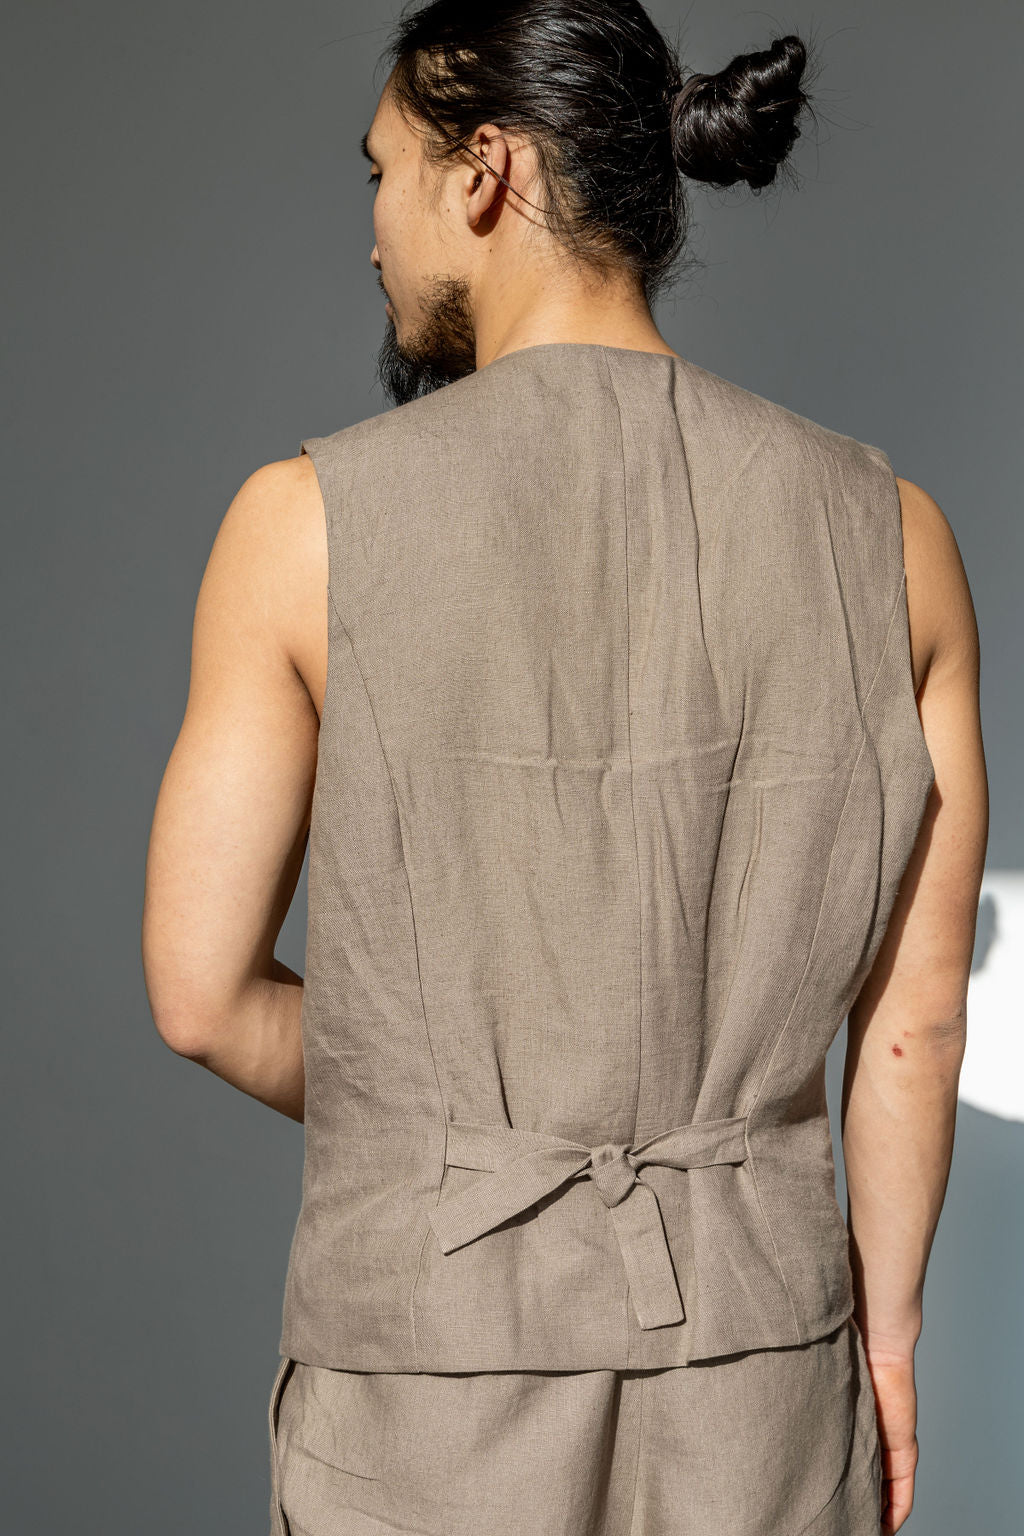 Linen waistcoat with a cinched back.